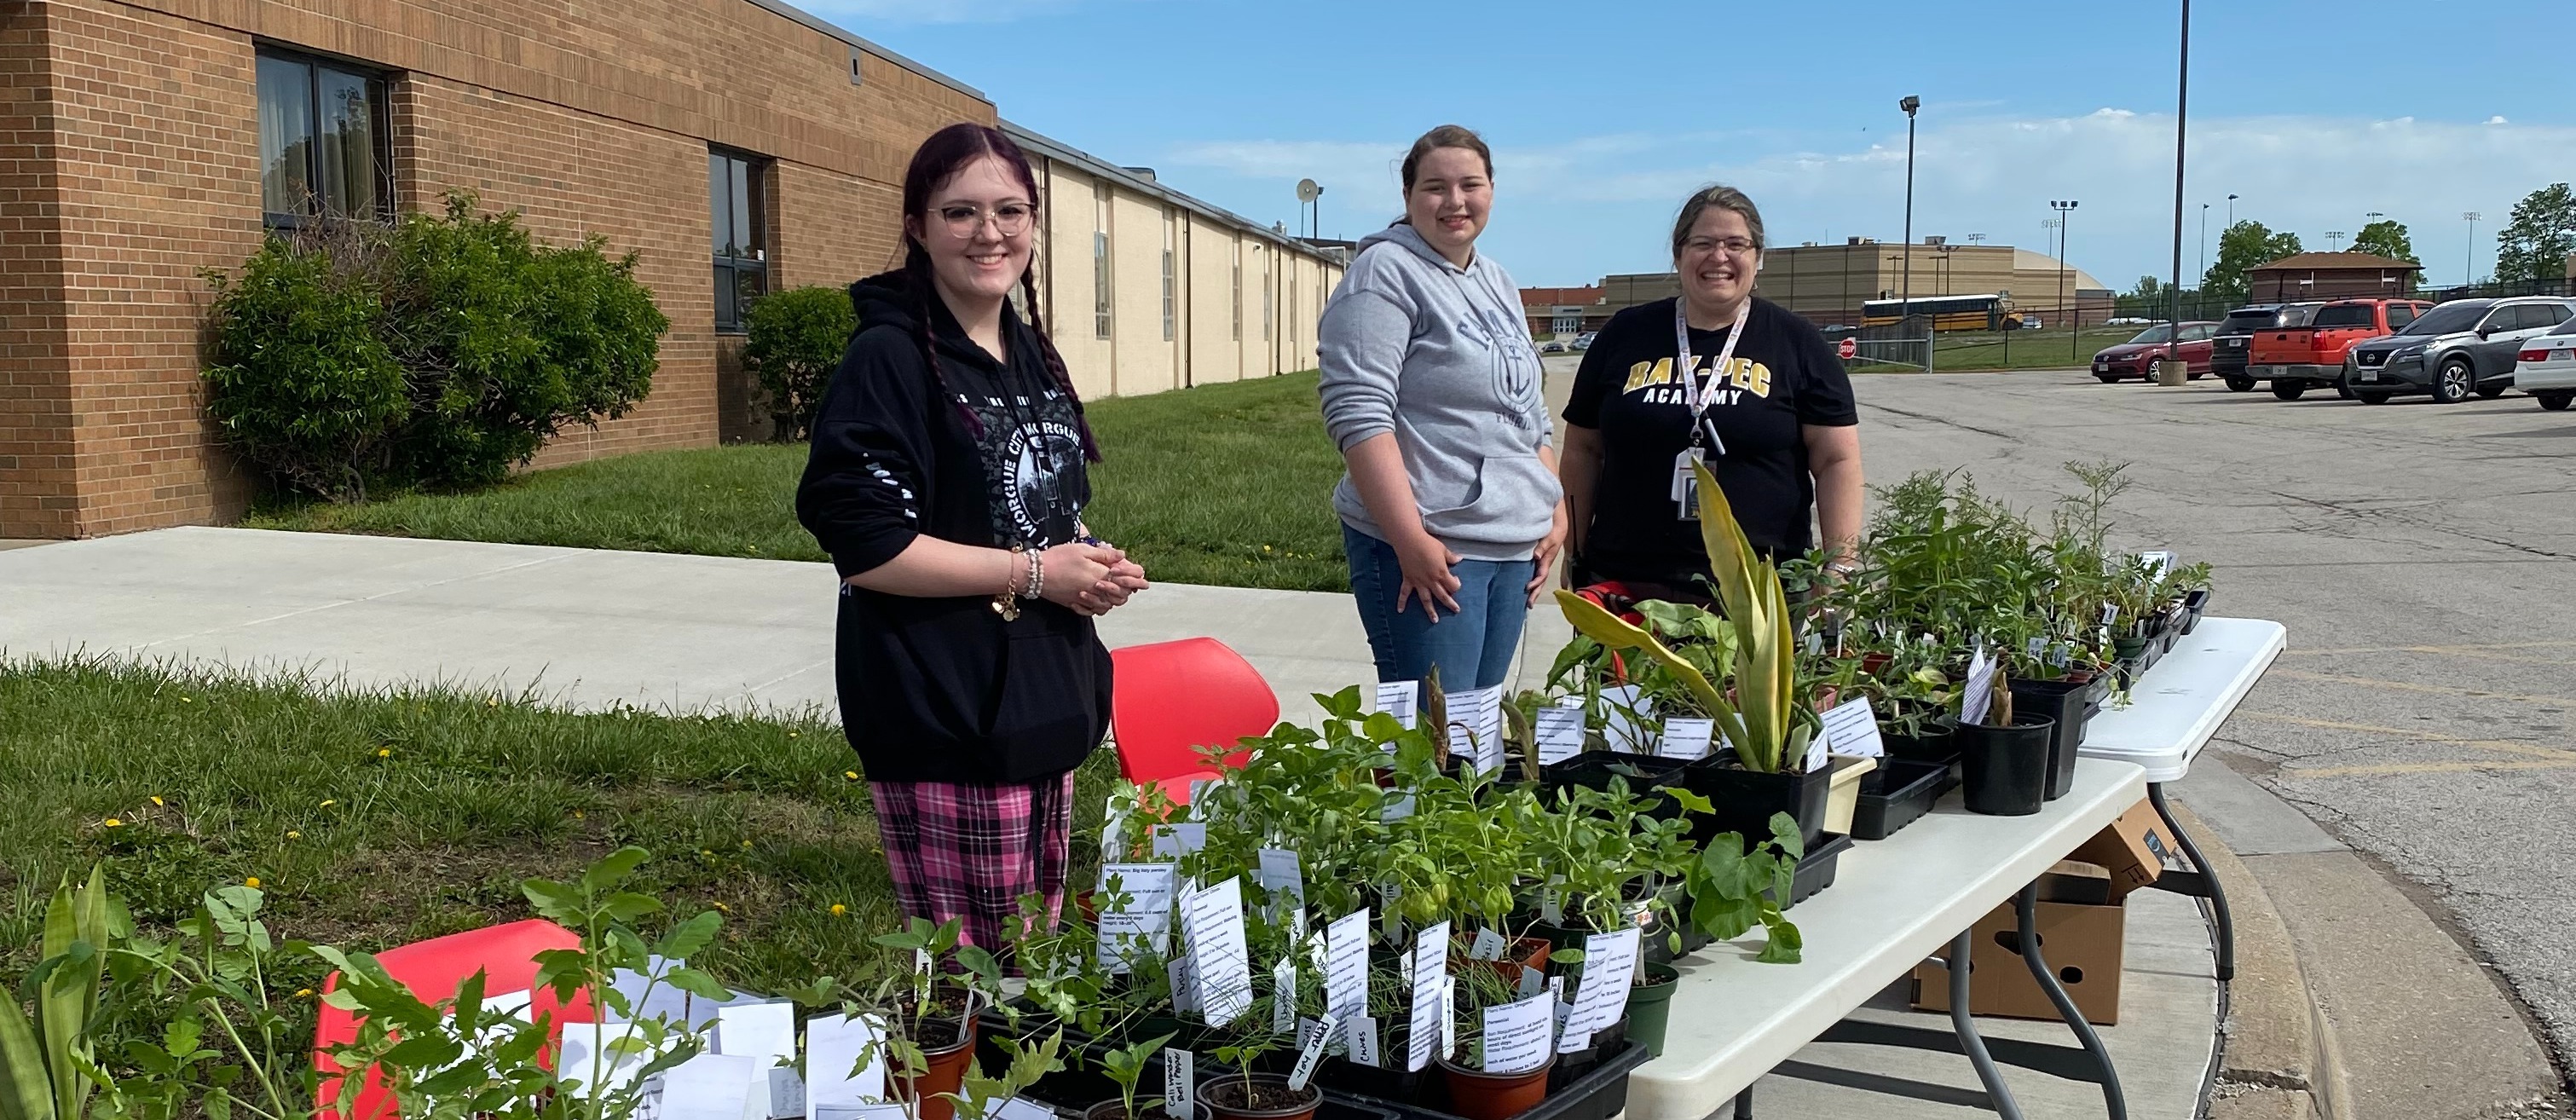 Ray-Pec Academy Plant Giveaway